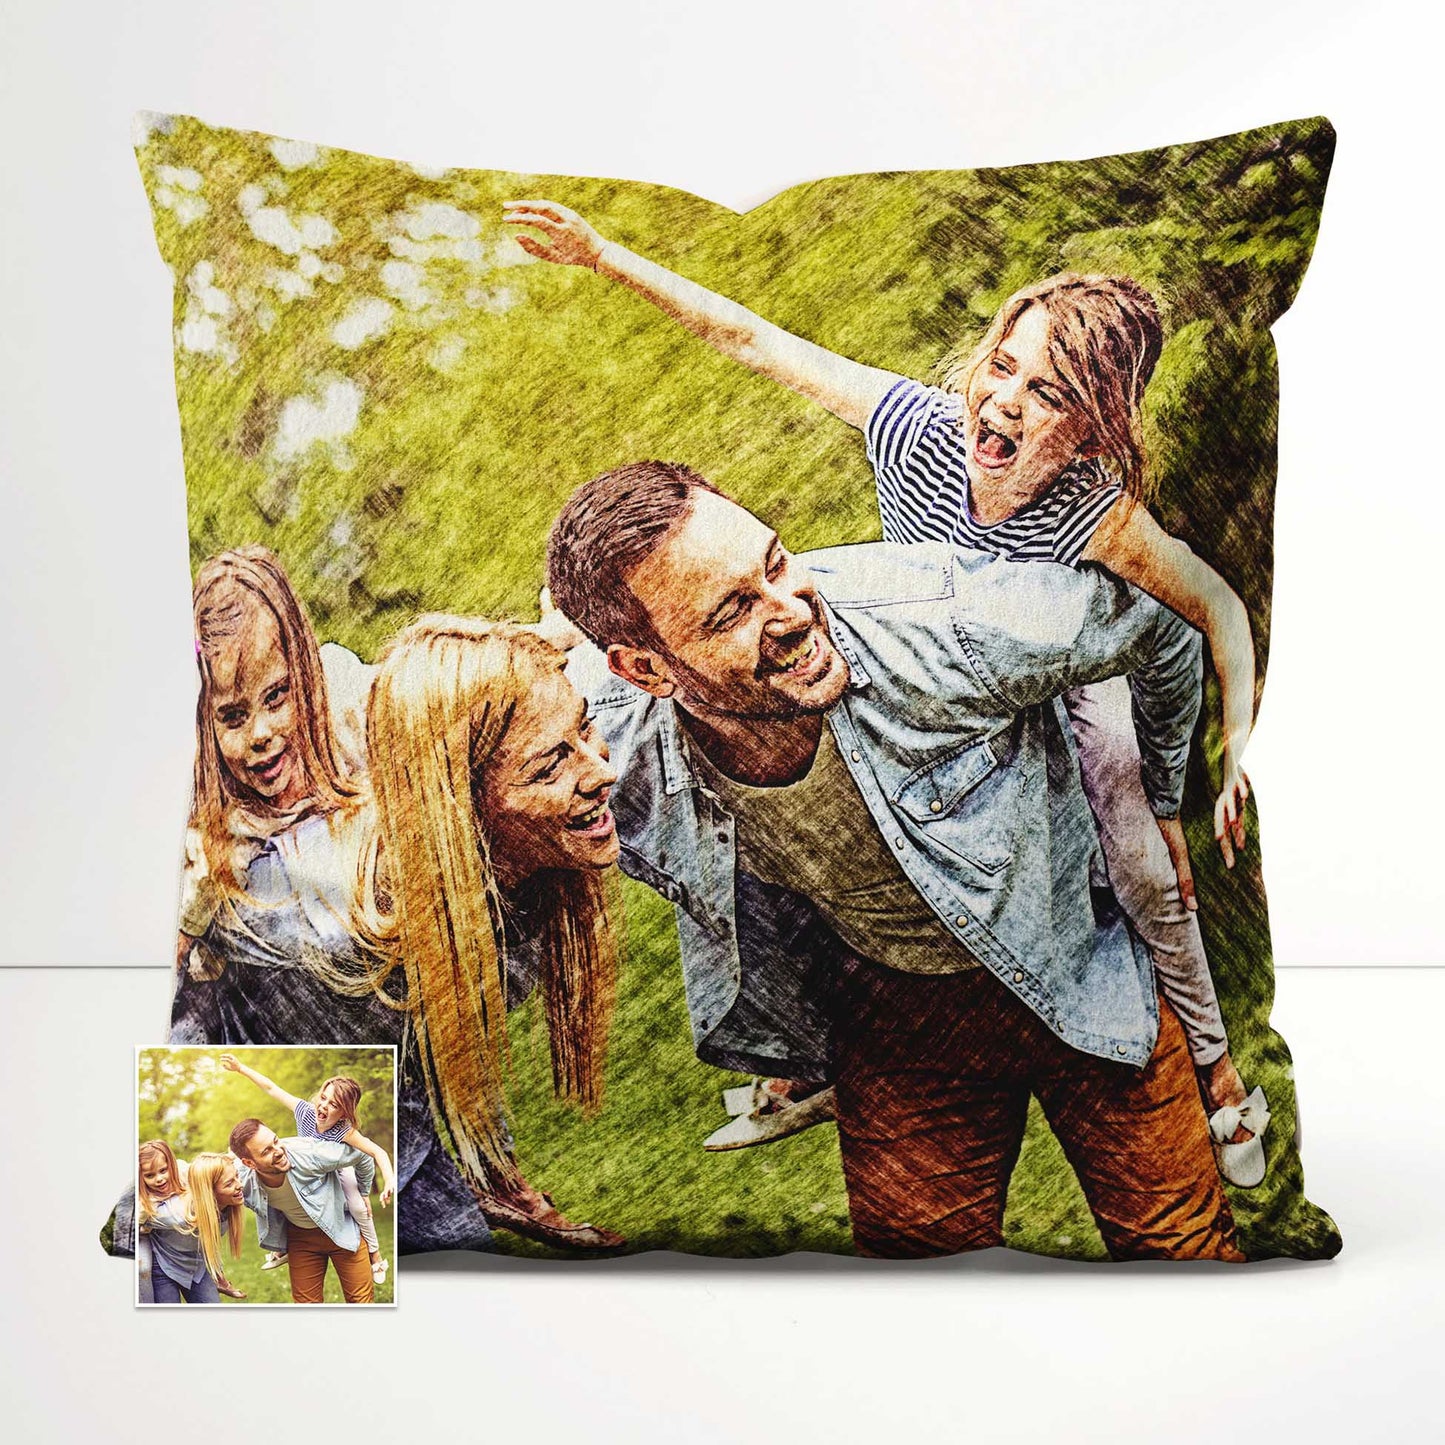 Experience the artistic energy of a Personalised Charcoal Drawing Cushion. Handcrafted with love and made from soft velvet, it provides a comfortable and cosy touch. With a drawing from your photo, it showcases the natural and real beauty